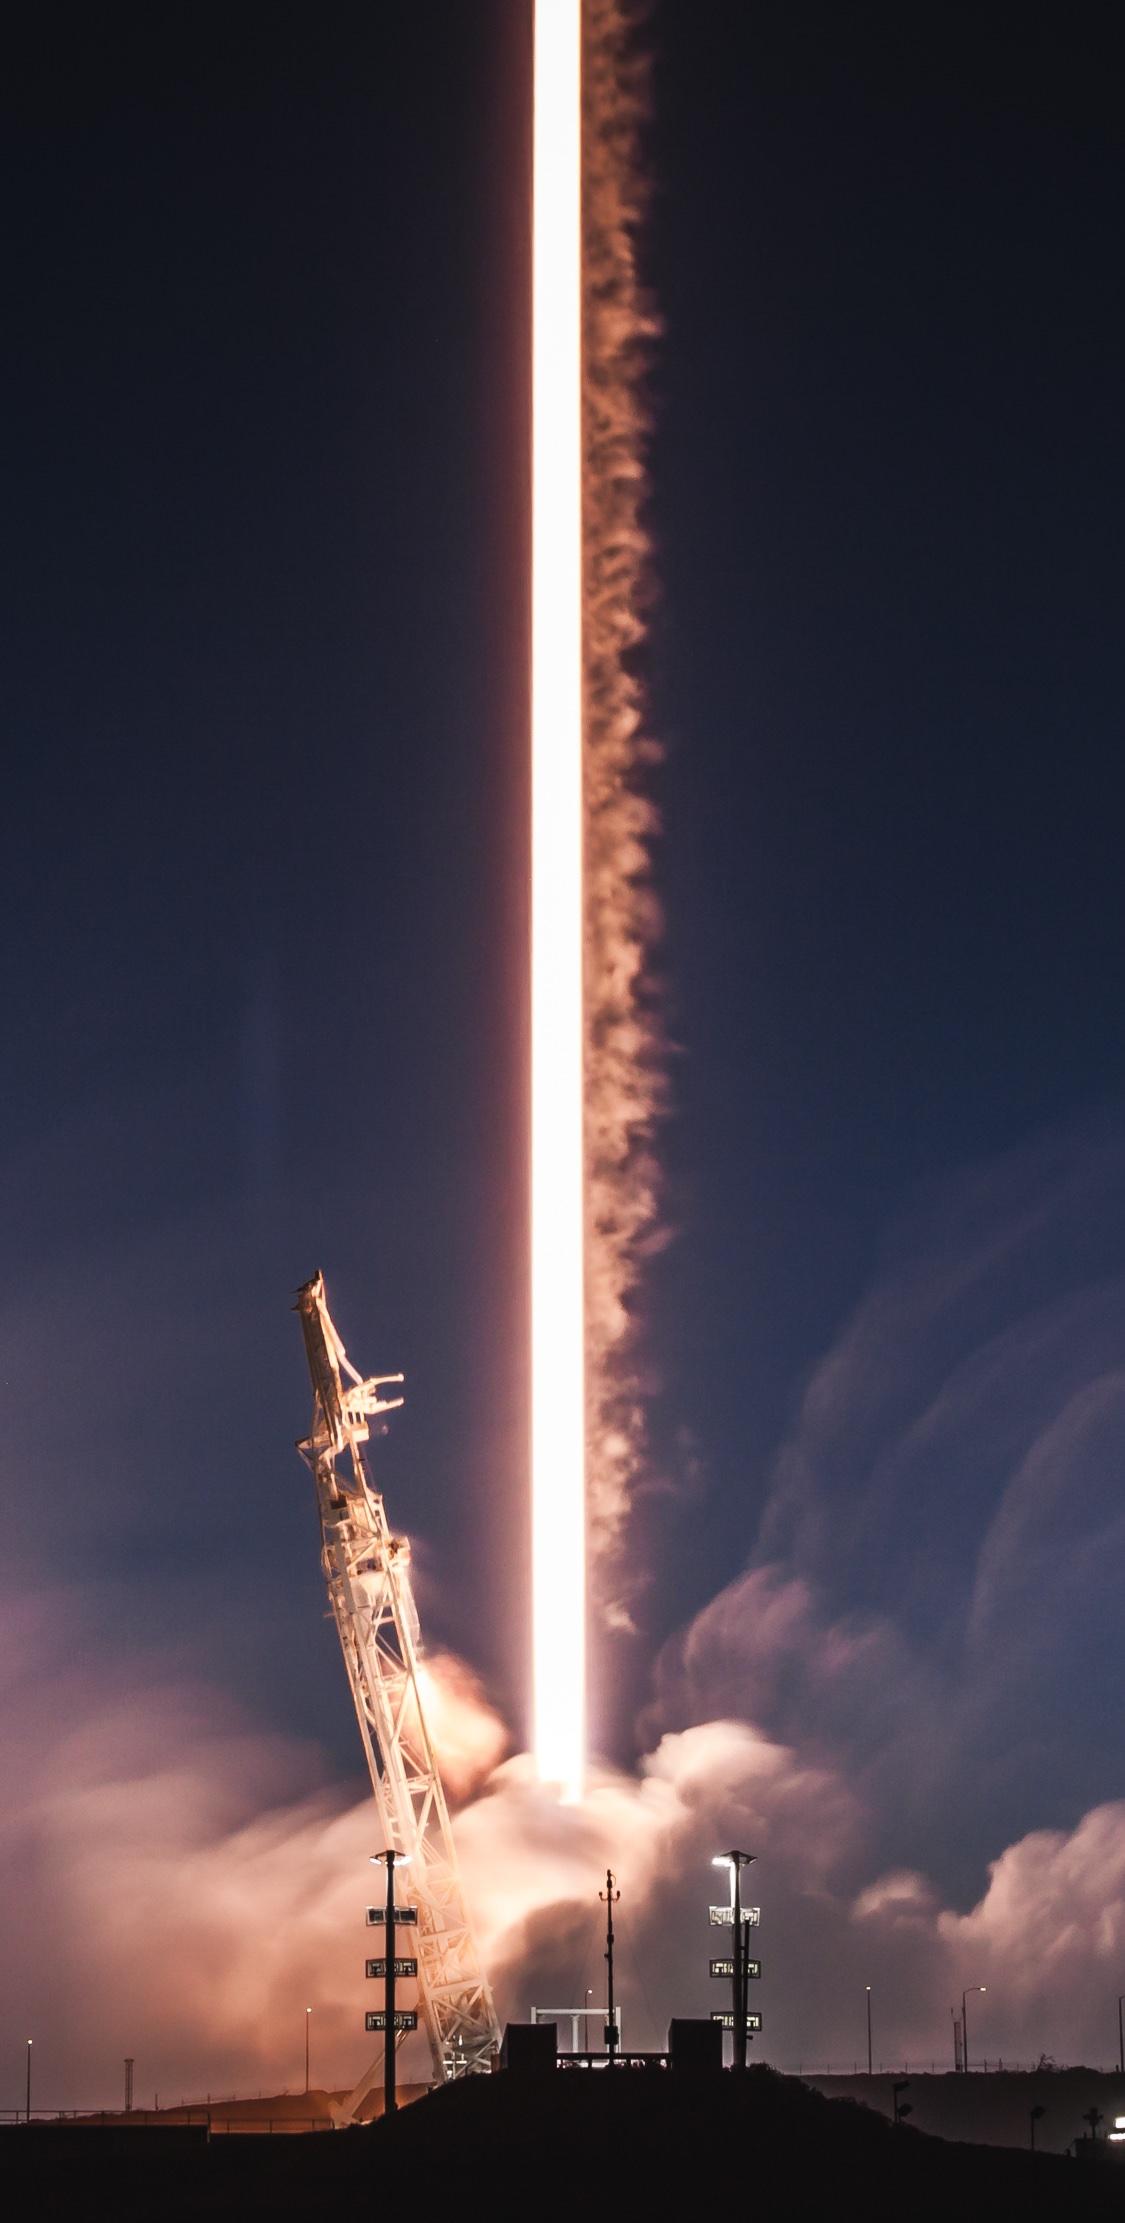 Iphone SpaceX Wallpaper - KoLPaPer - Awesome Free HD Wallpapers